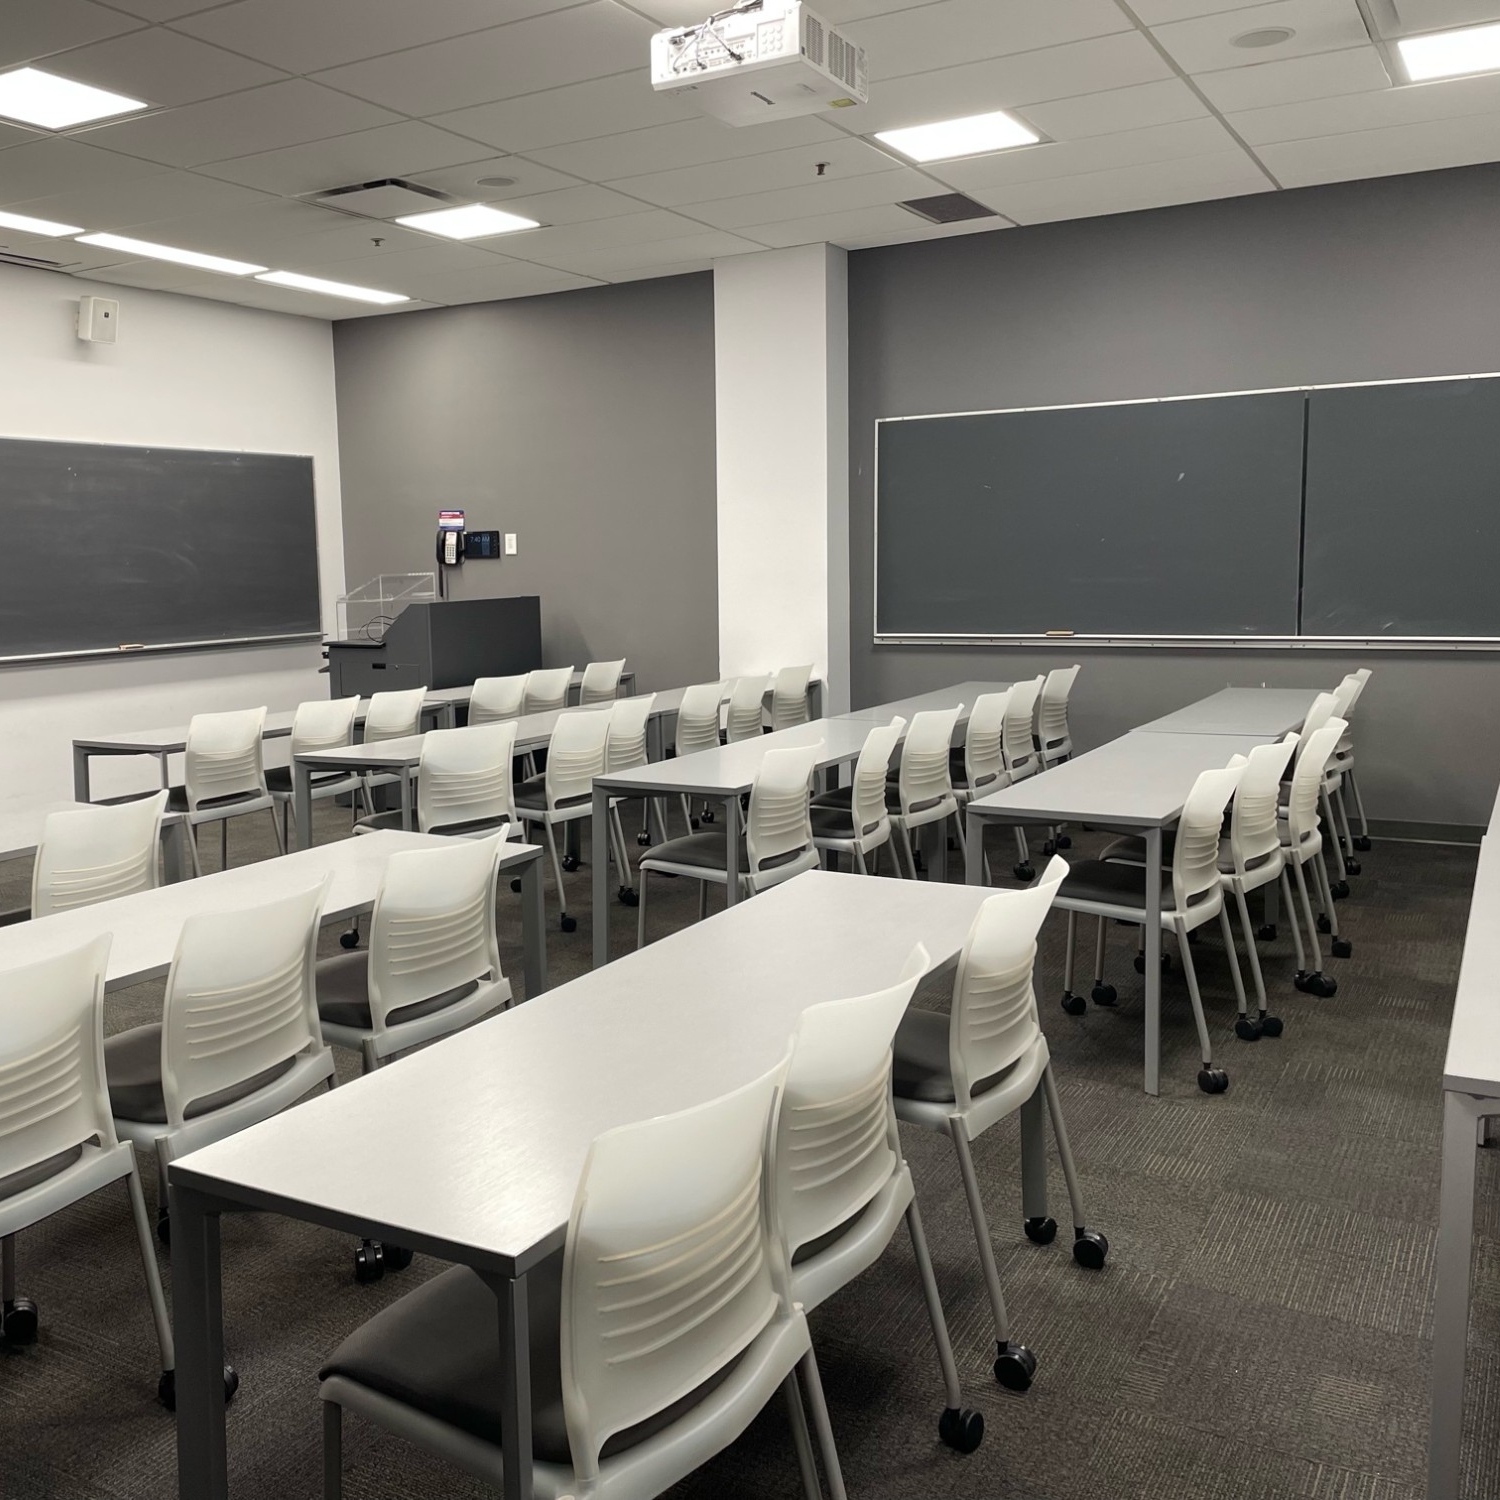 Classroom with rows of tables and chairs